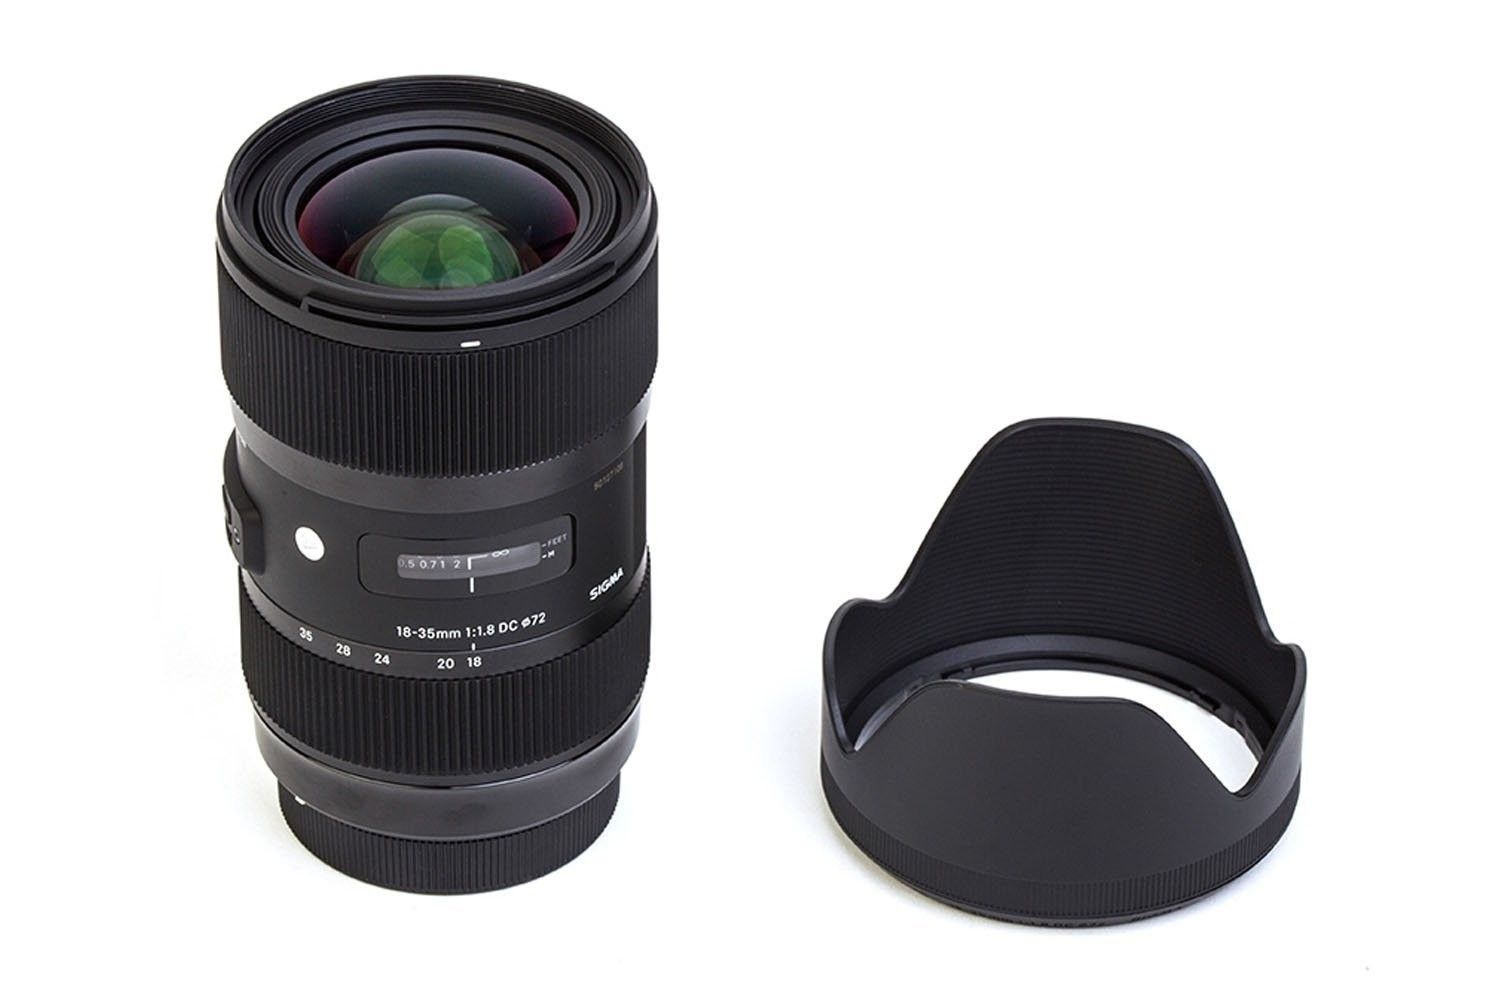 Sigma 18-35mm f1.8 DC HSM Canon Fit Lens